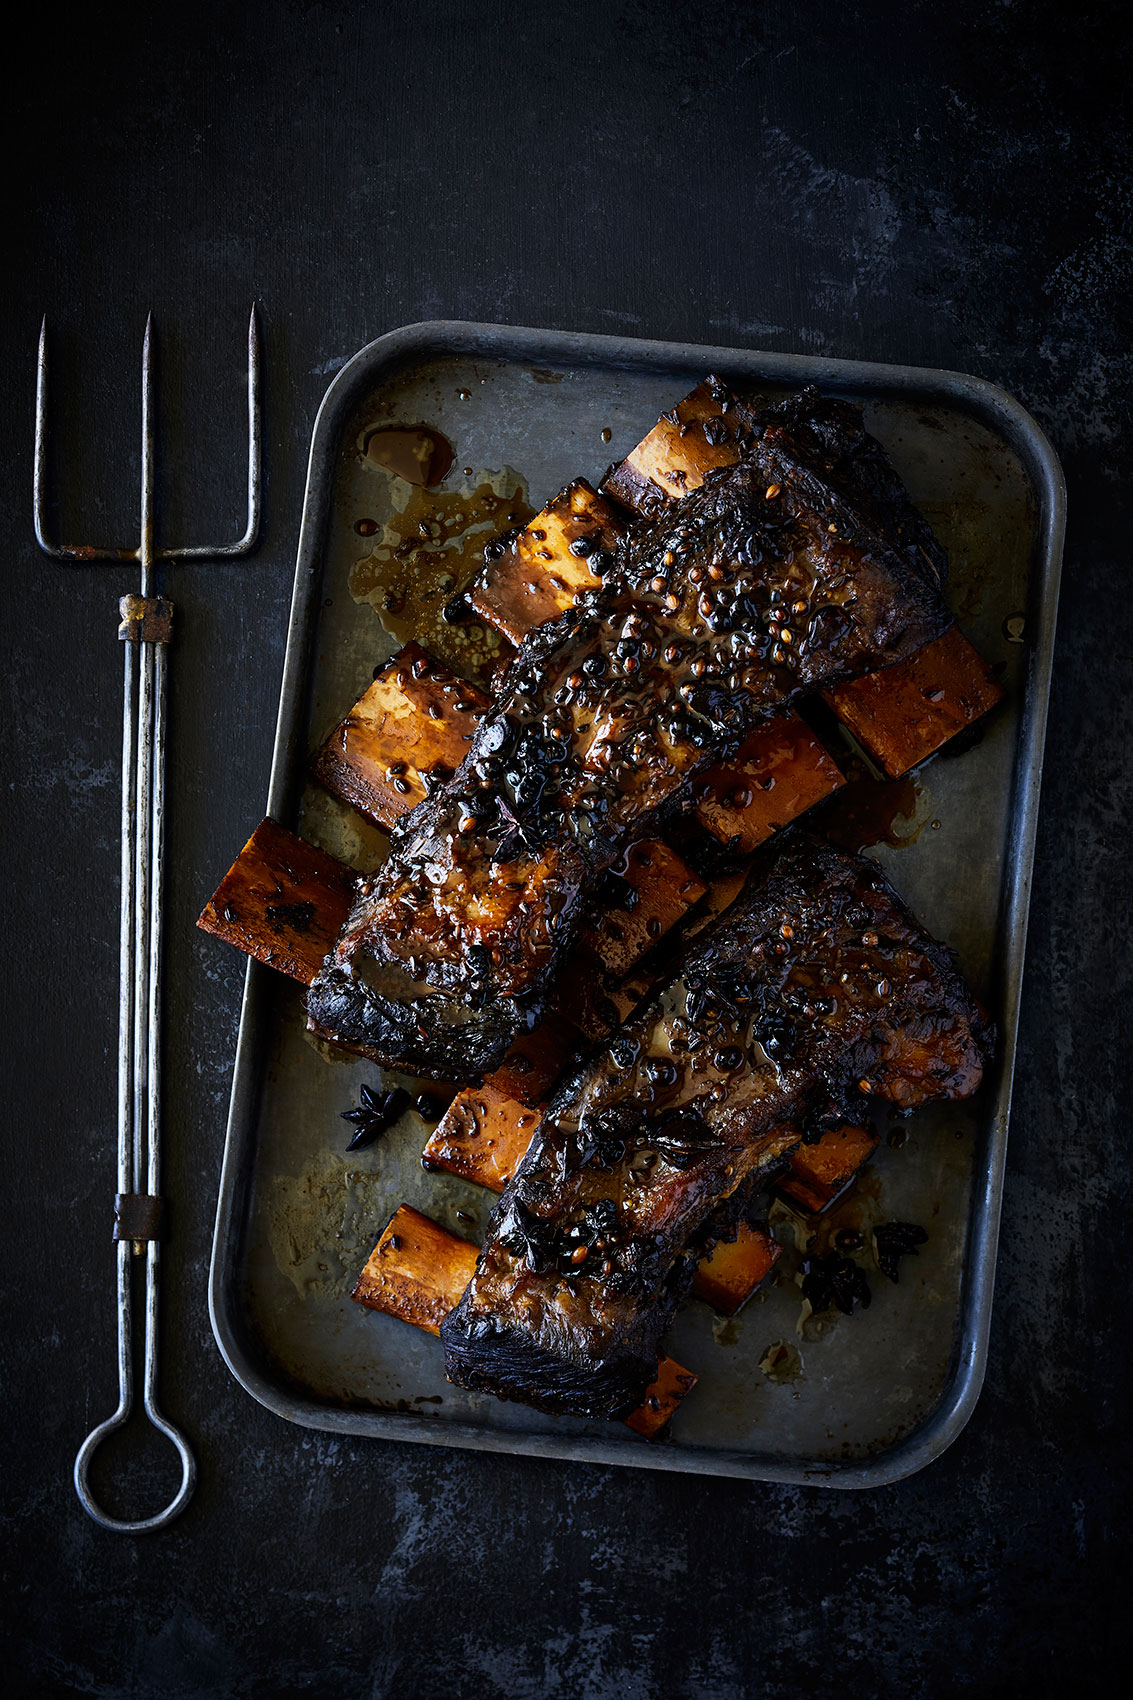 Spiced Beef Short Ribs on Dark Oven Tray • Advertising & Editorial Food Photography